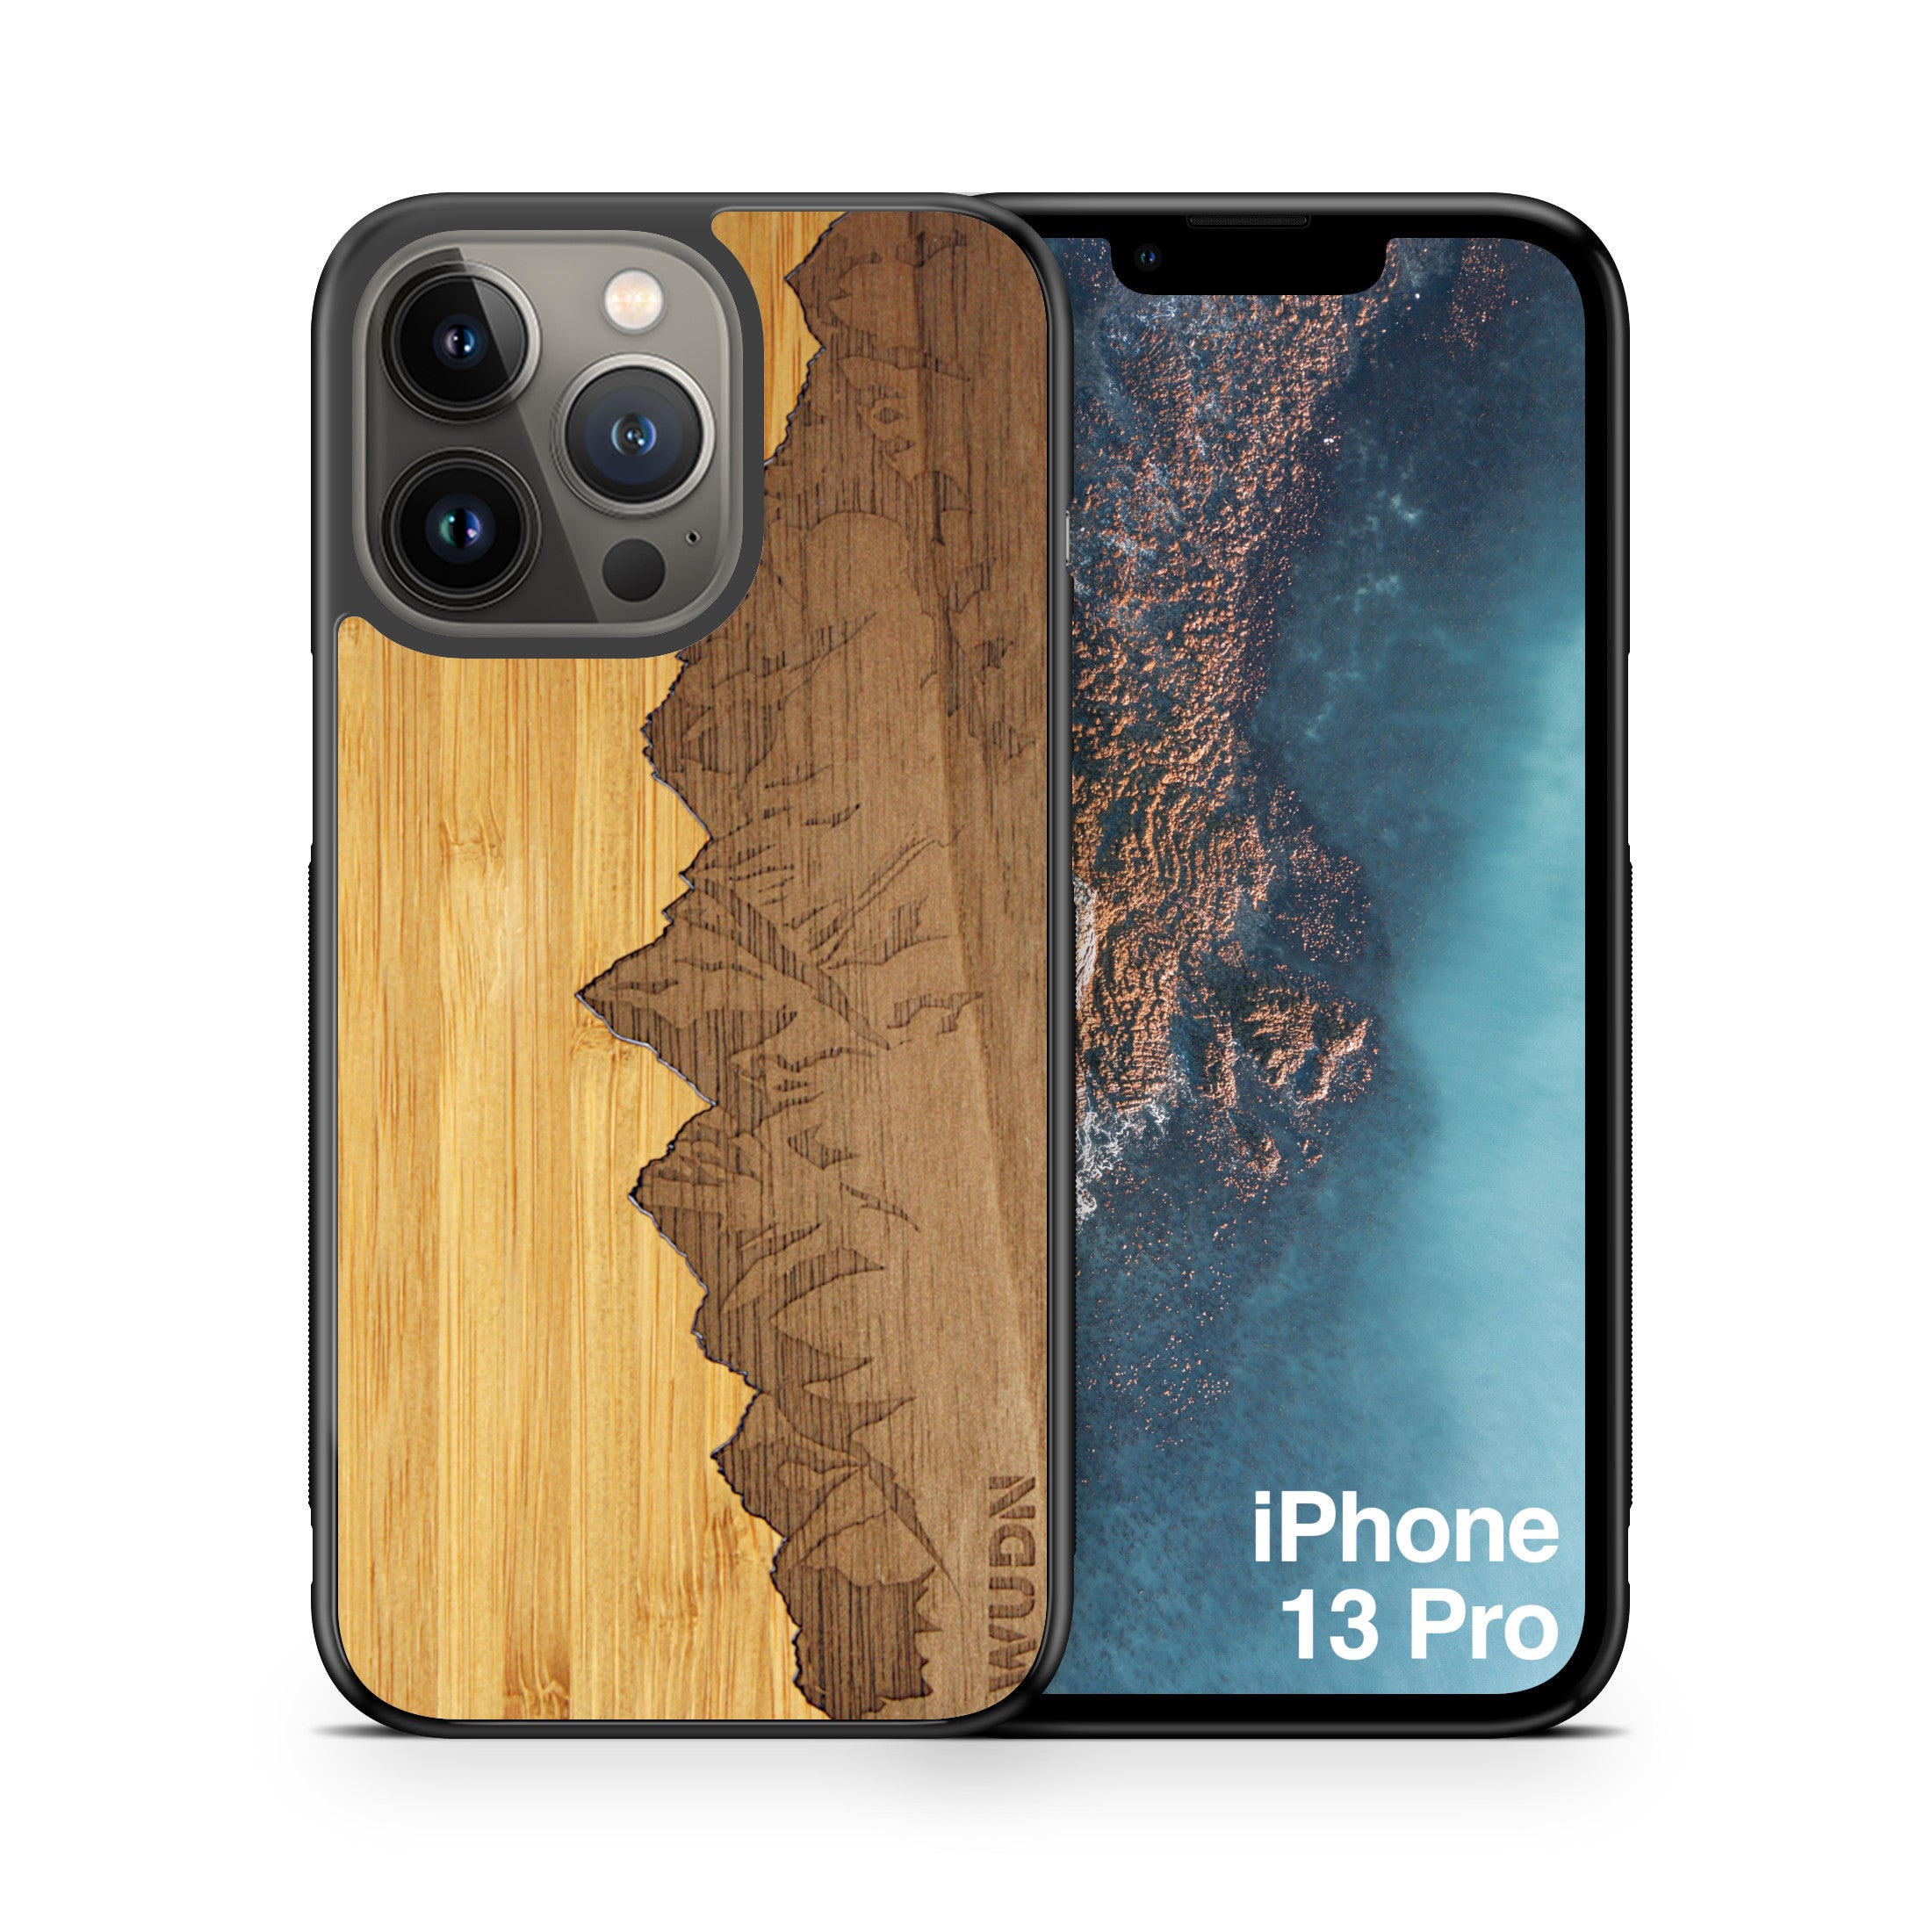 Slim Wooden Phone Case (Sawtooth Mountains Bamboo Sky)